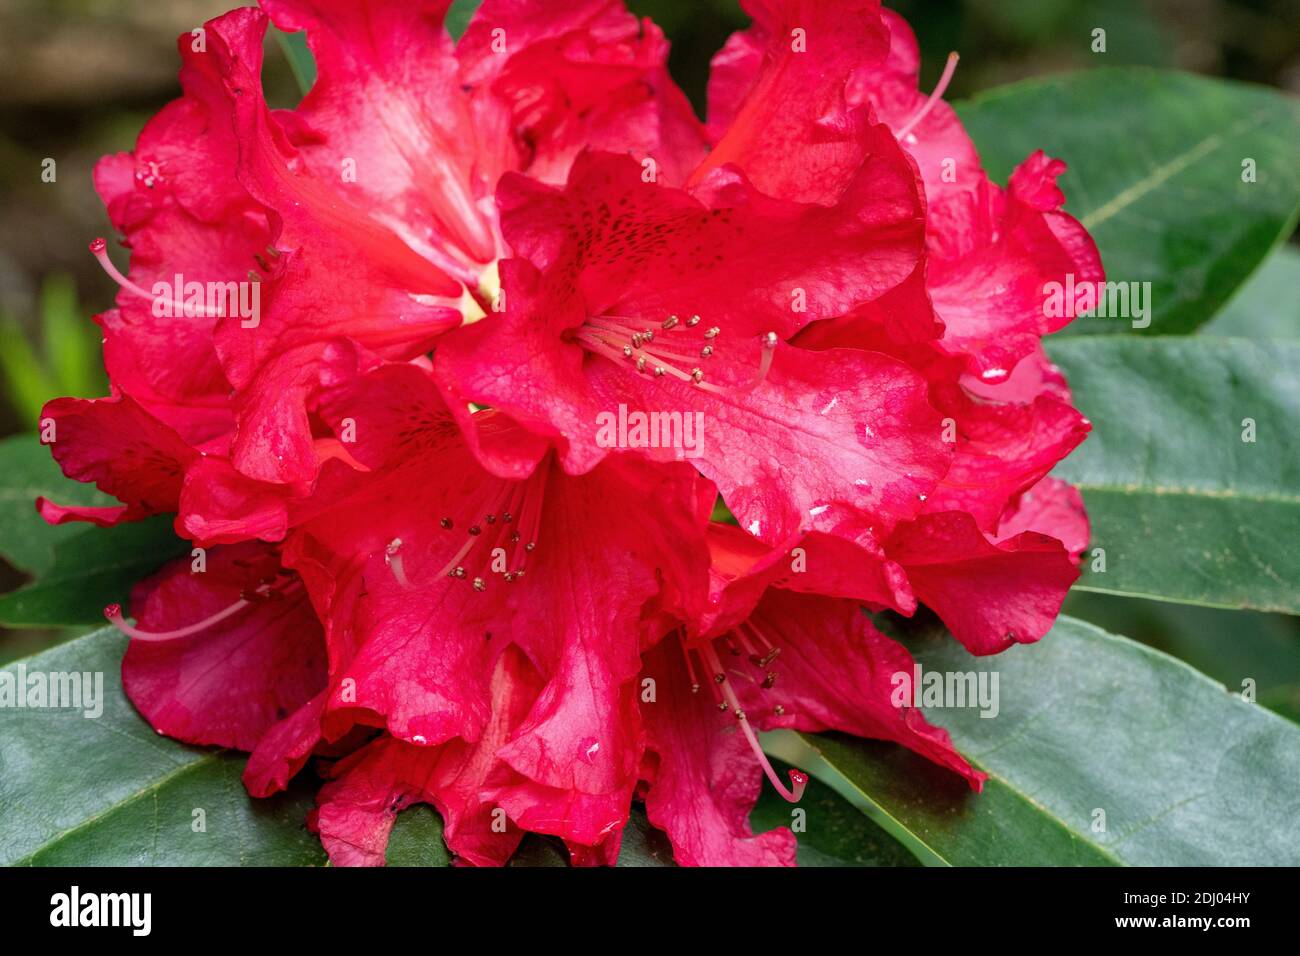 Red Pacific Rhododendron blossom in Springtime. Stock Photo